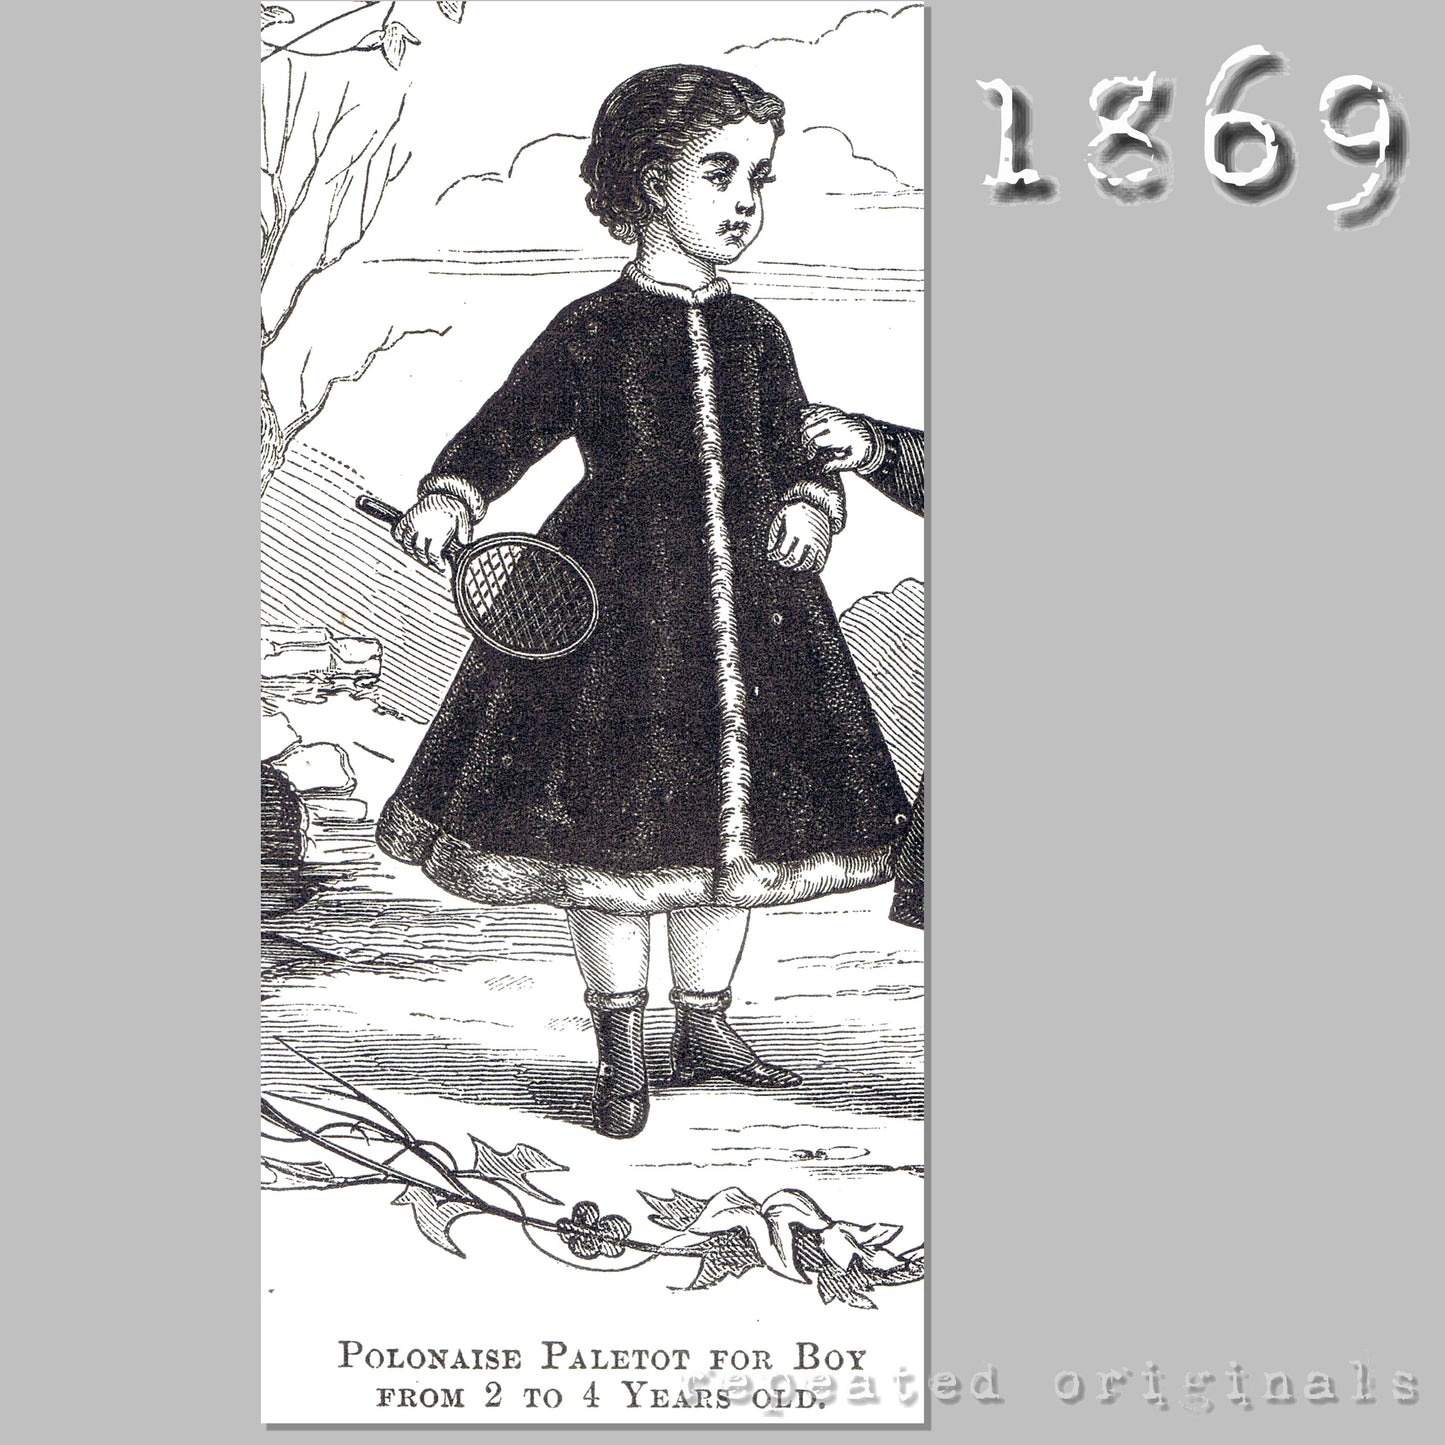 1869 Polonaise Paletot for Boy 2 - 4 Years Sewing Pattern - INSTANT DOWNLOAD PDF